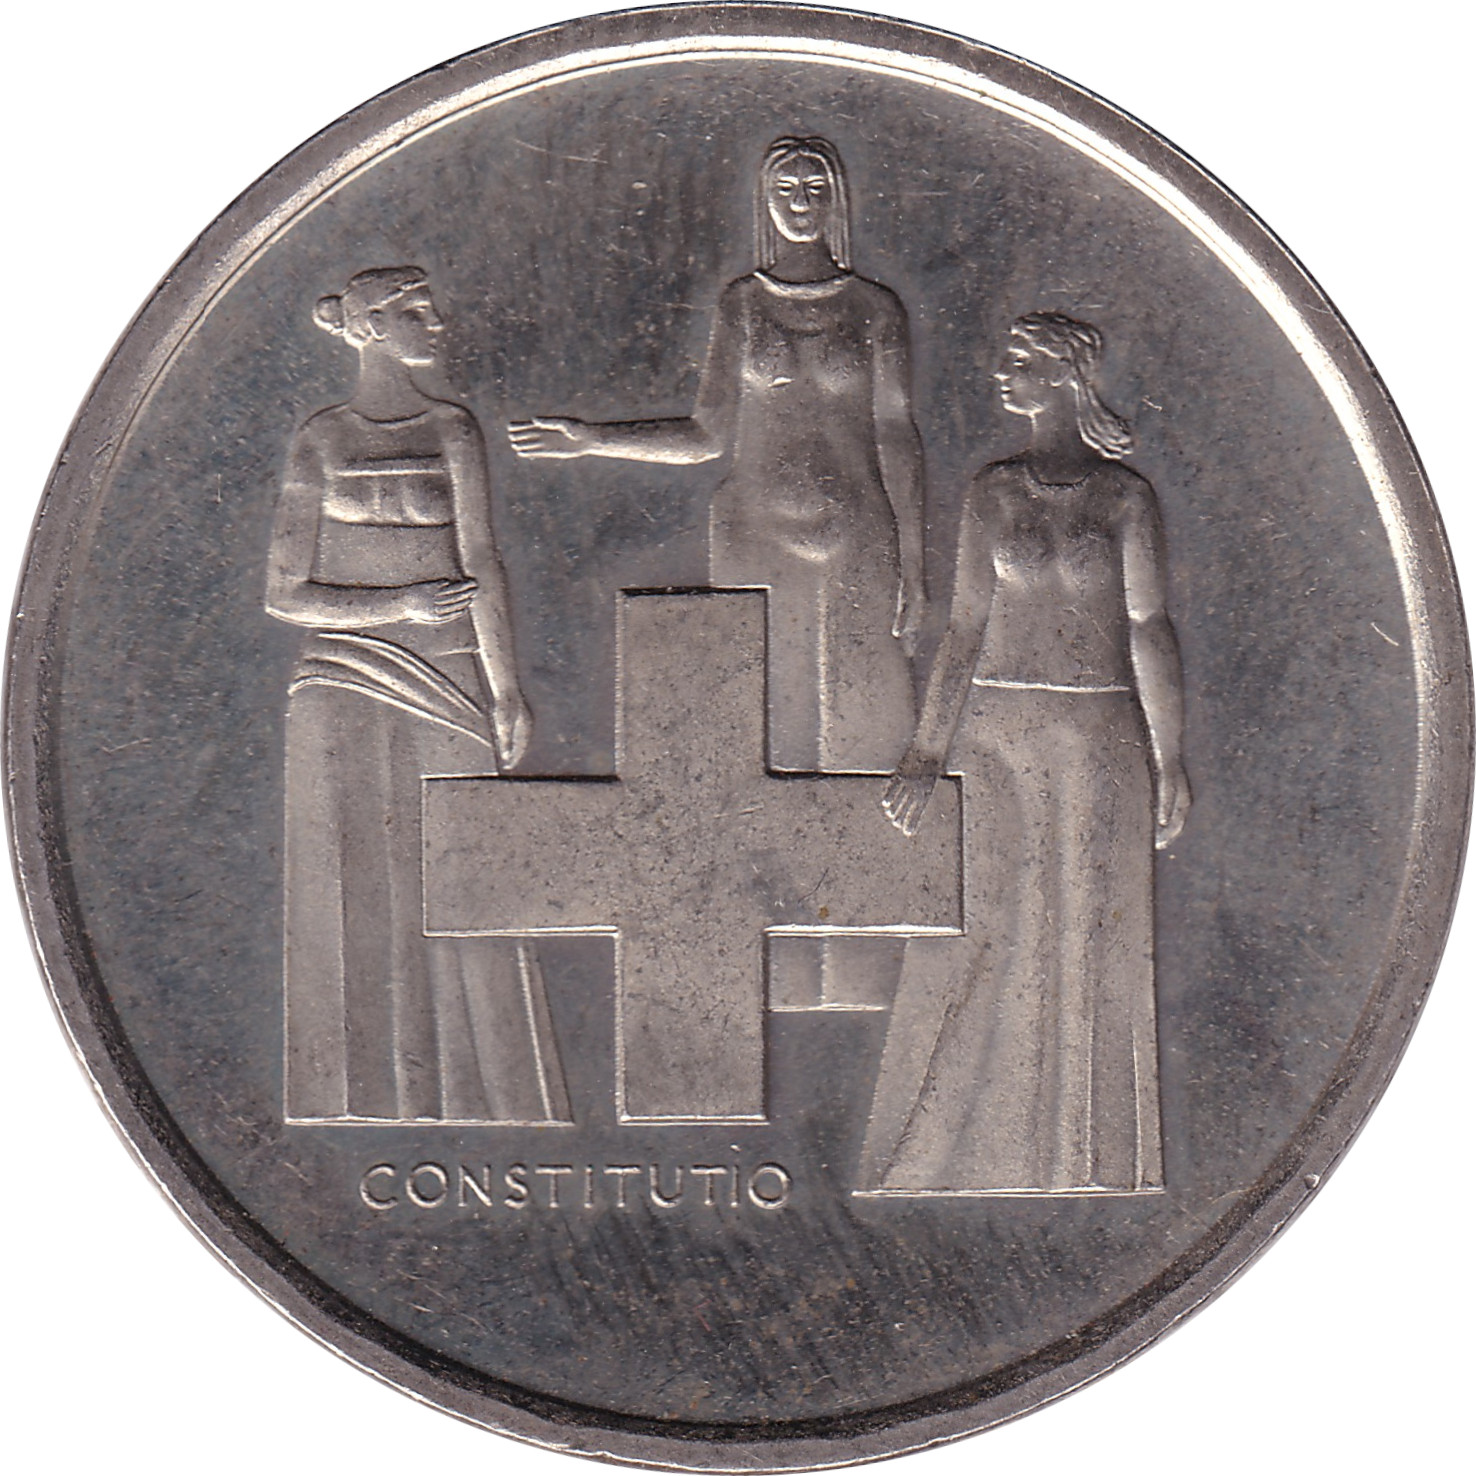 5 francs - Révision constitutionelle - 100 years